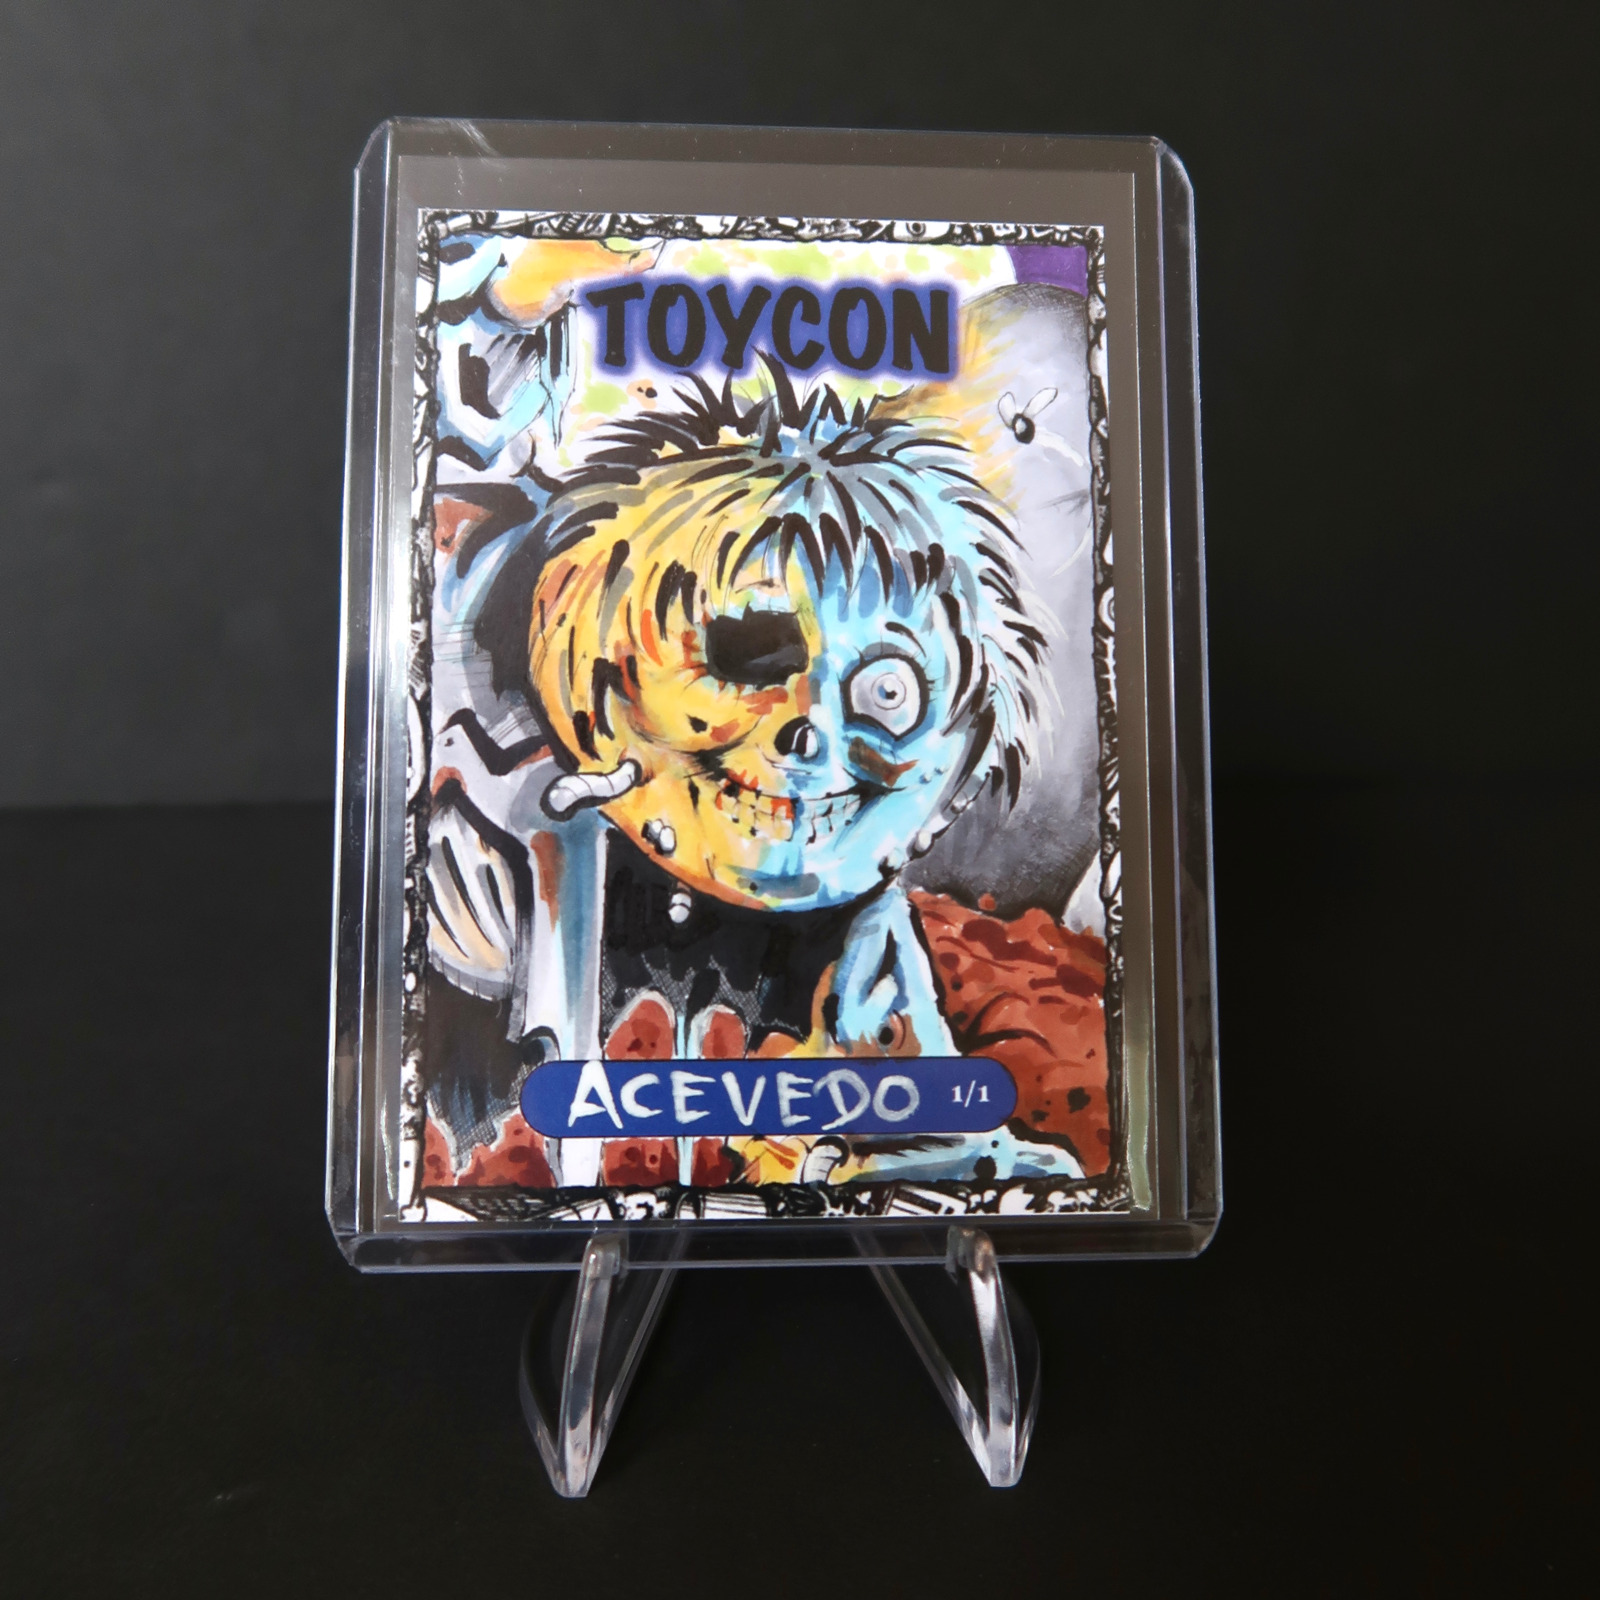 2020 GARBAGE PAIL KIDS TOYCON DEAD TED BY DAVID ACEVEDO CS